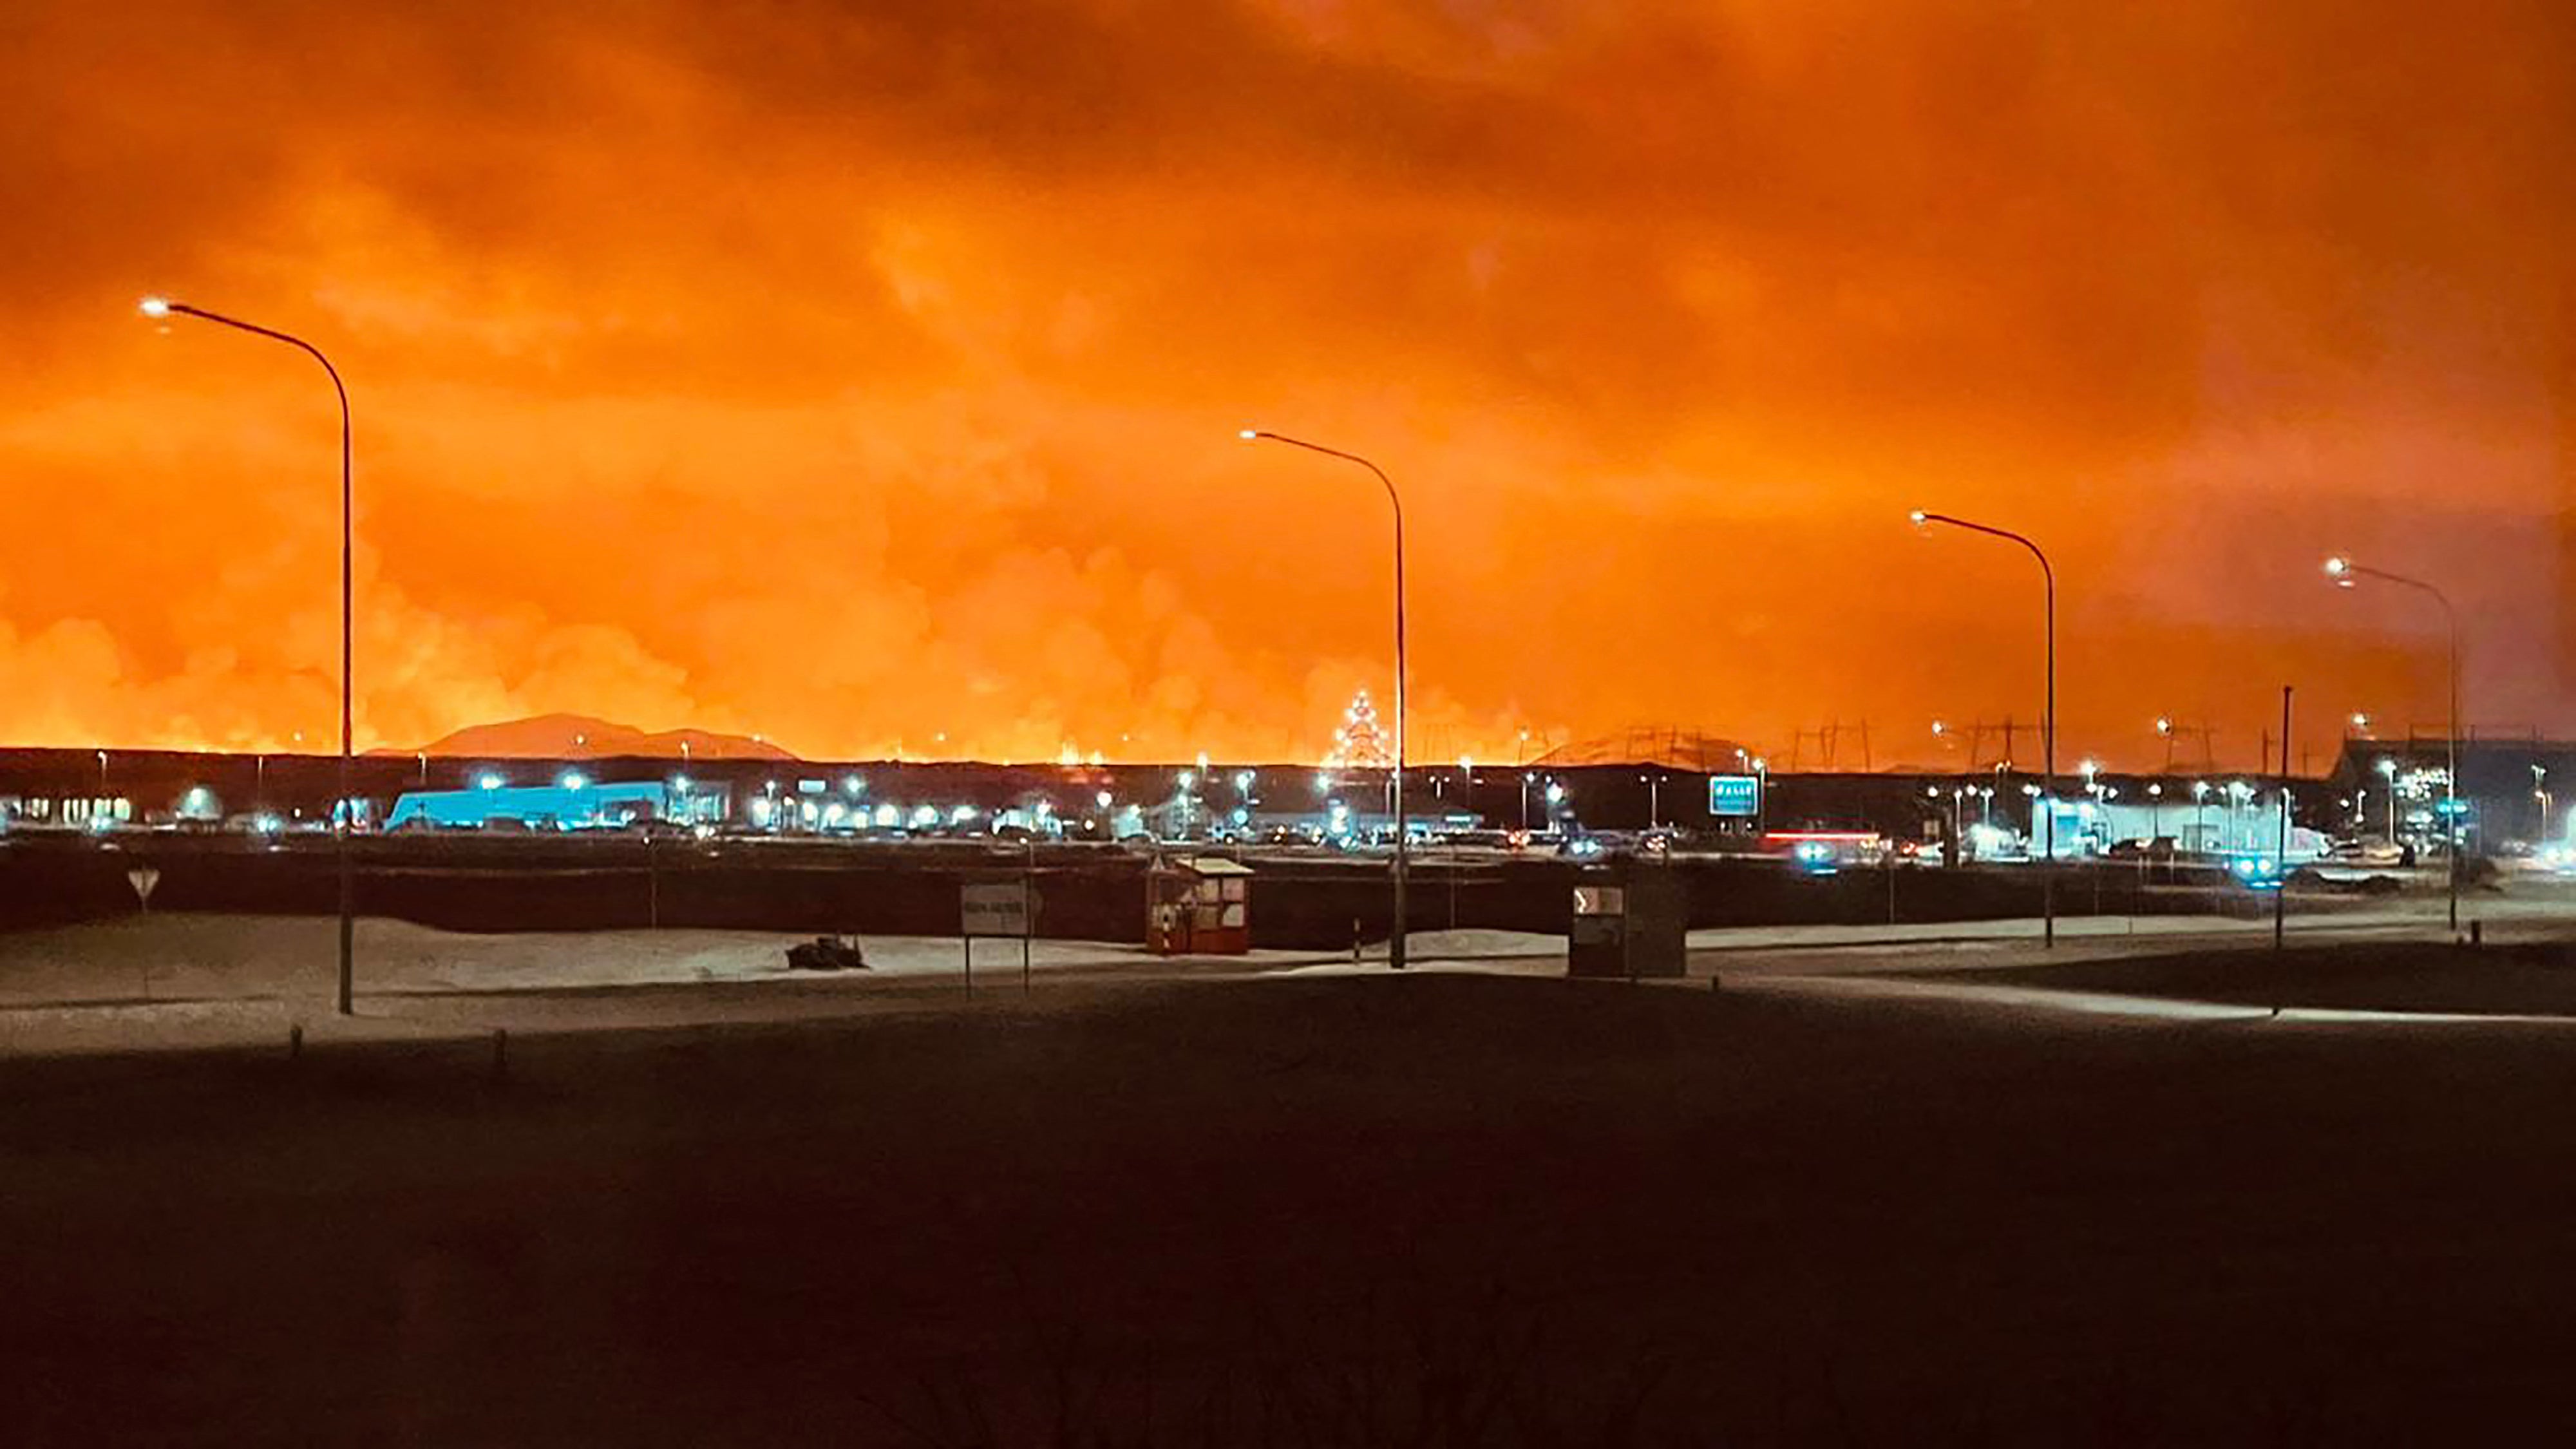 The night sky above Iceland is lit up orange by a volcanic eruption after weeks of uncertainty